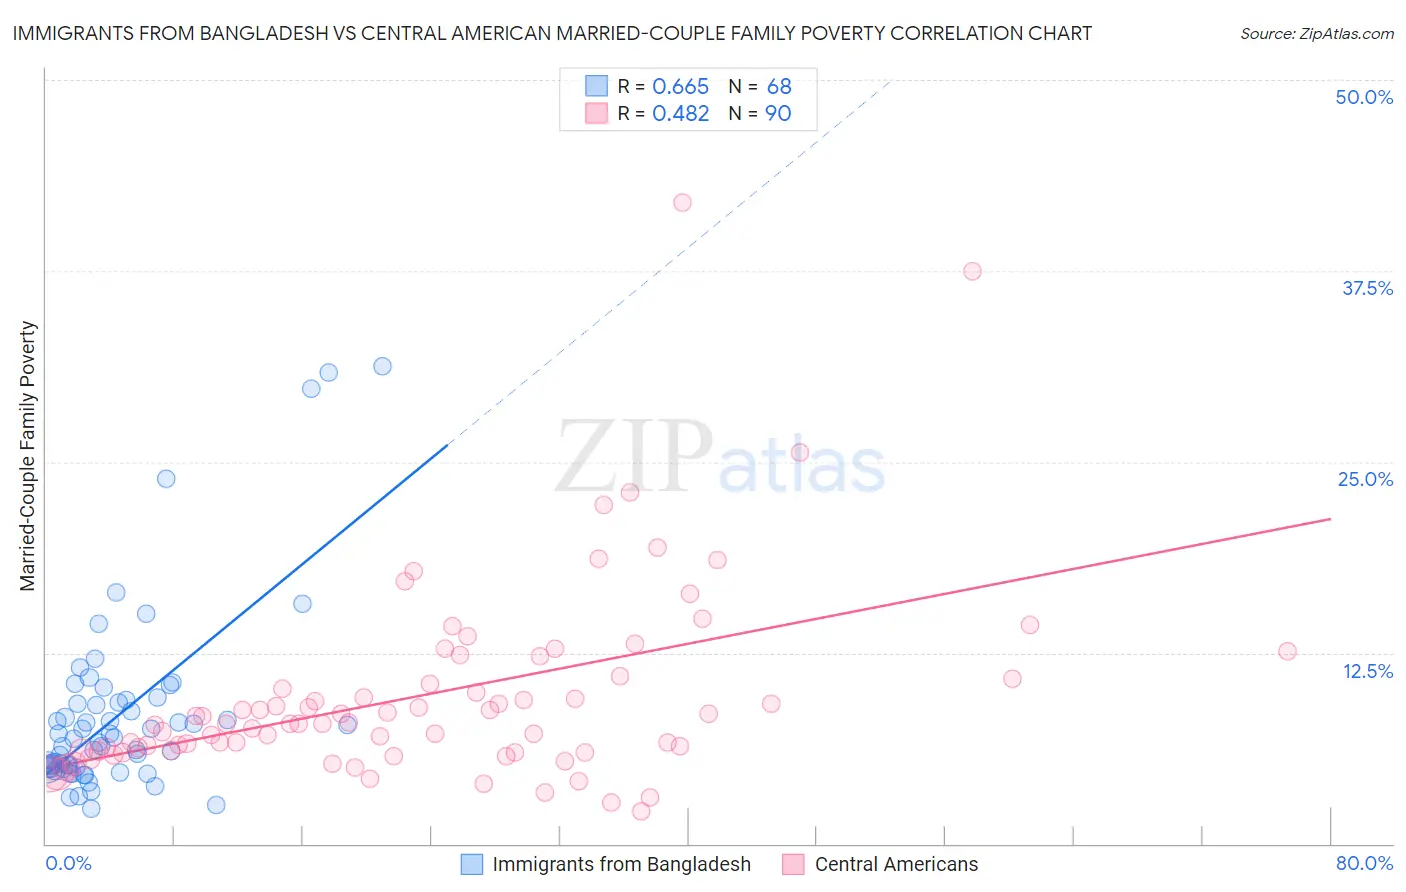 Immigrants from Bangladesh vs Central American Married-Couple Family Poverty